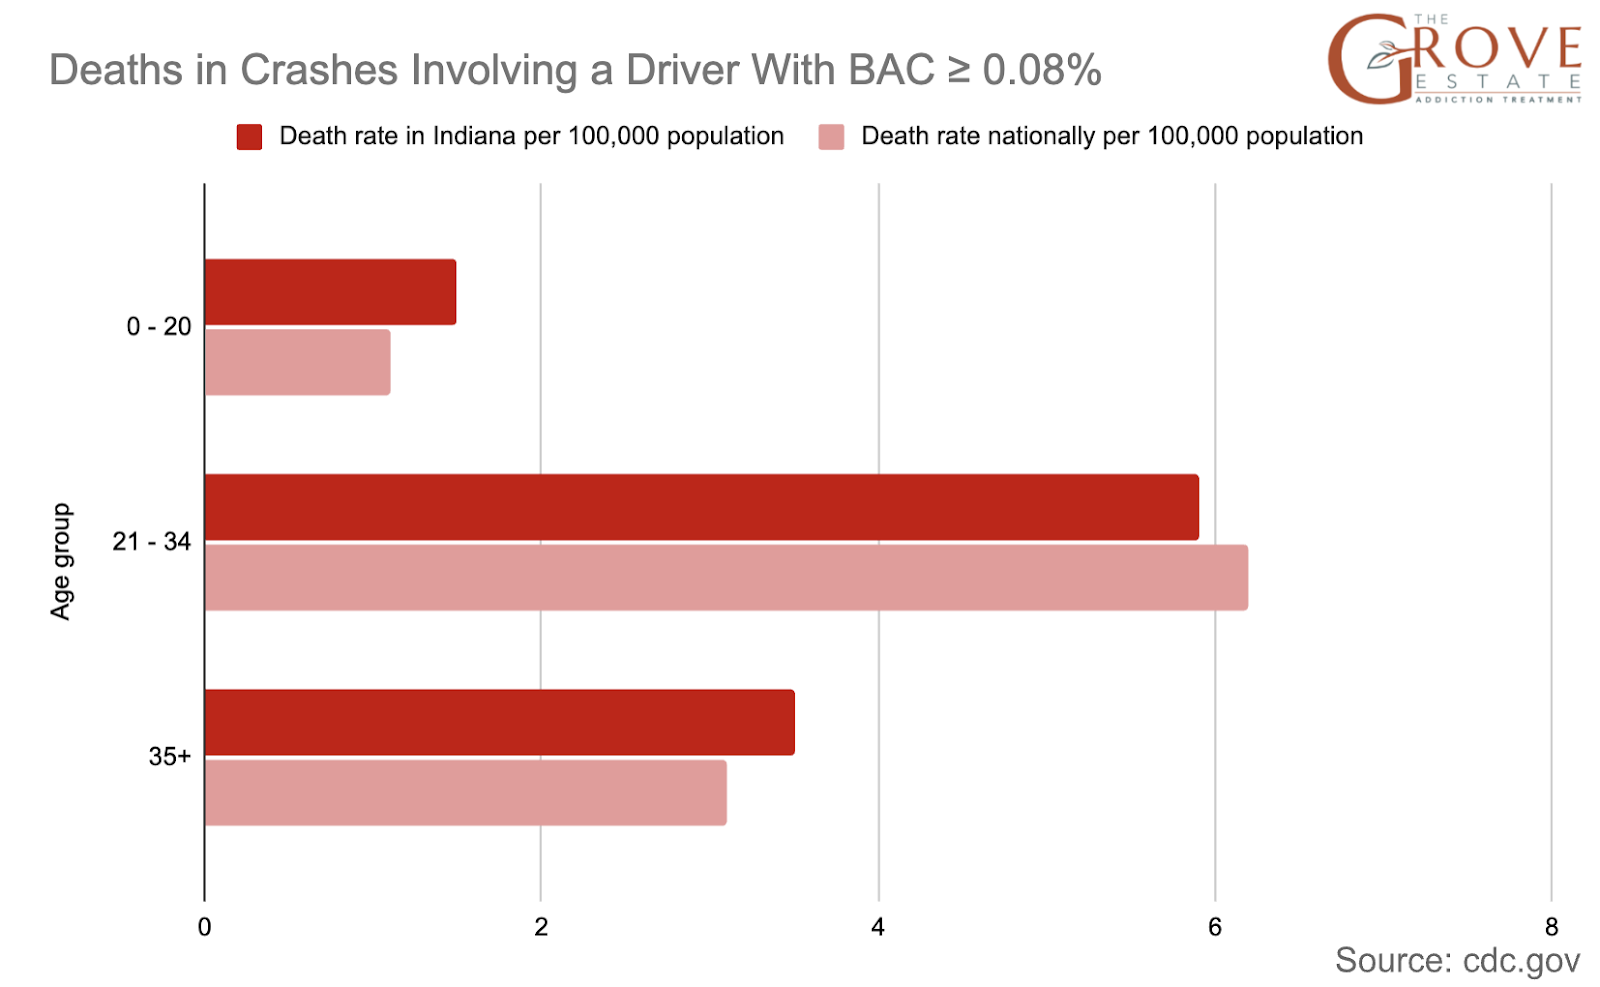 Deaths in crashes Involving a Driver with BAC > 0,08%